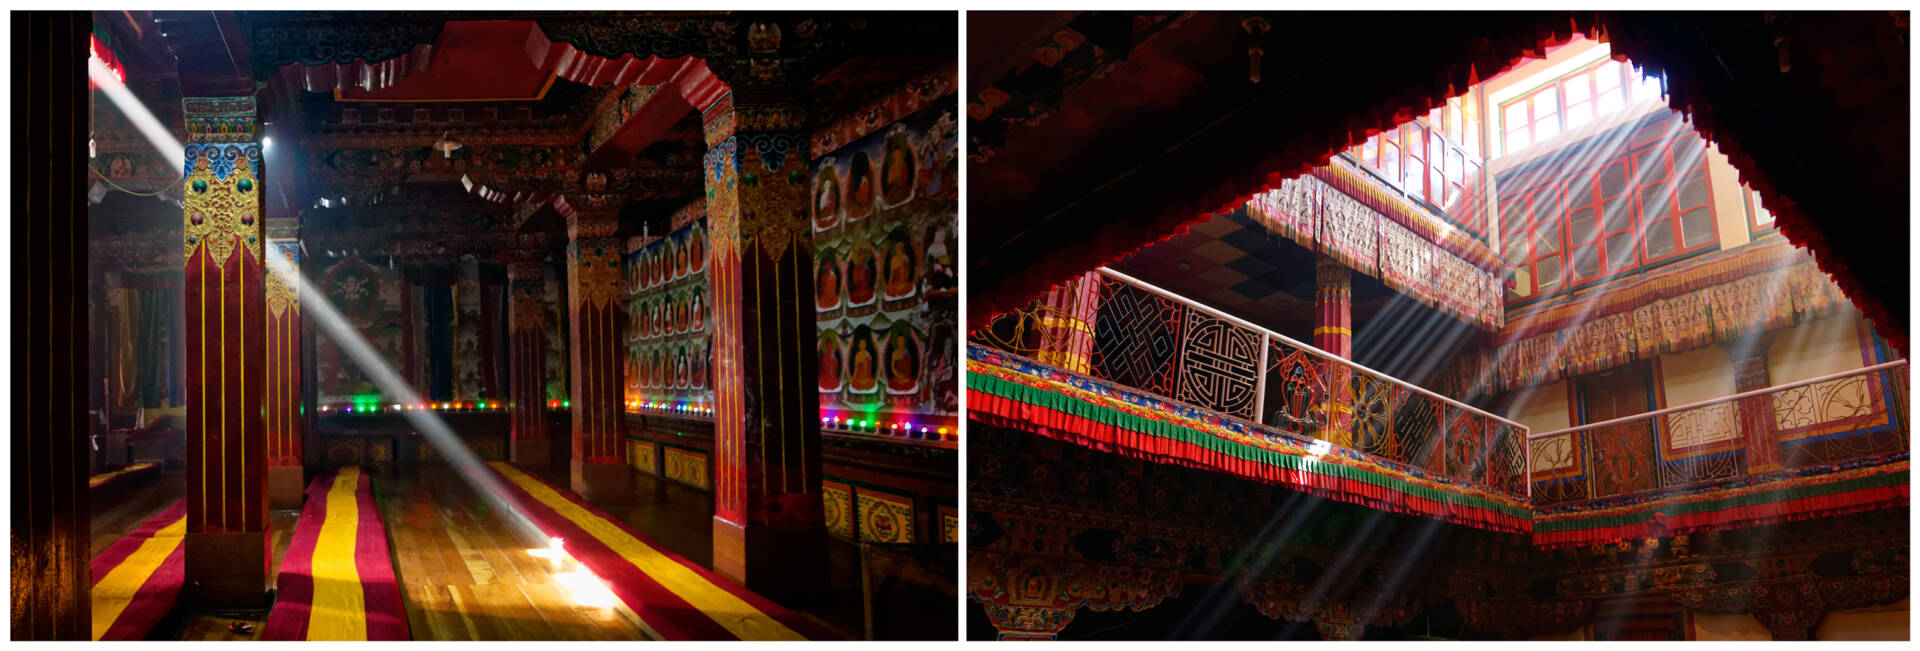 A beam of light cuts through the dark interior of the Dukhang. The sun’s rays stream in through upper storey windows